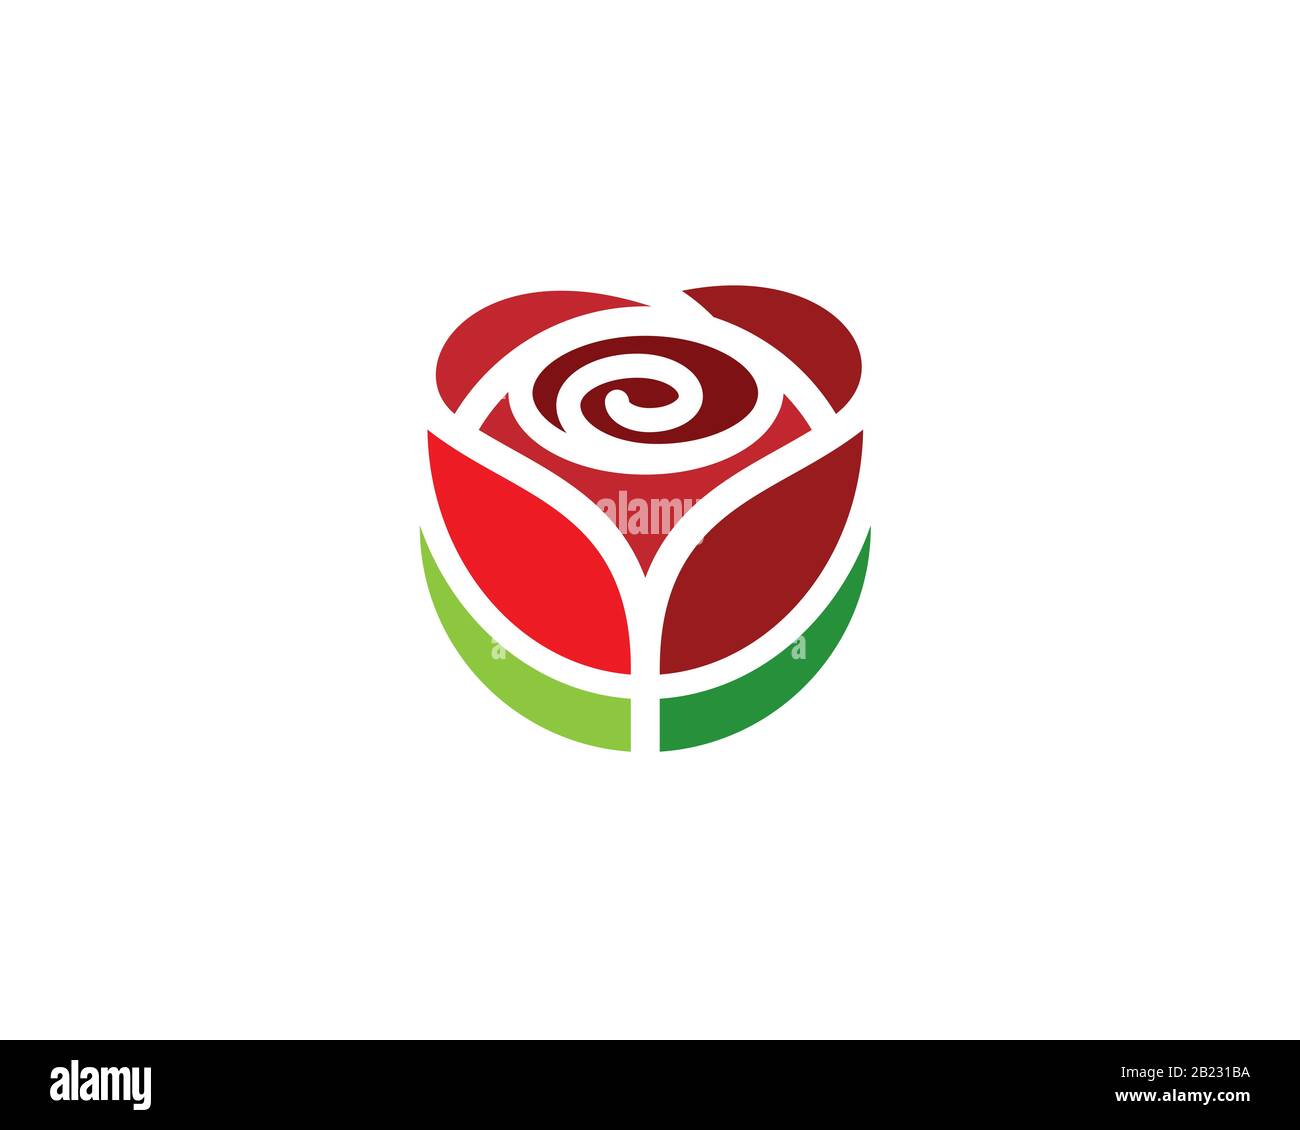 simple rose with green leaves logo vector Stock Vector